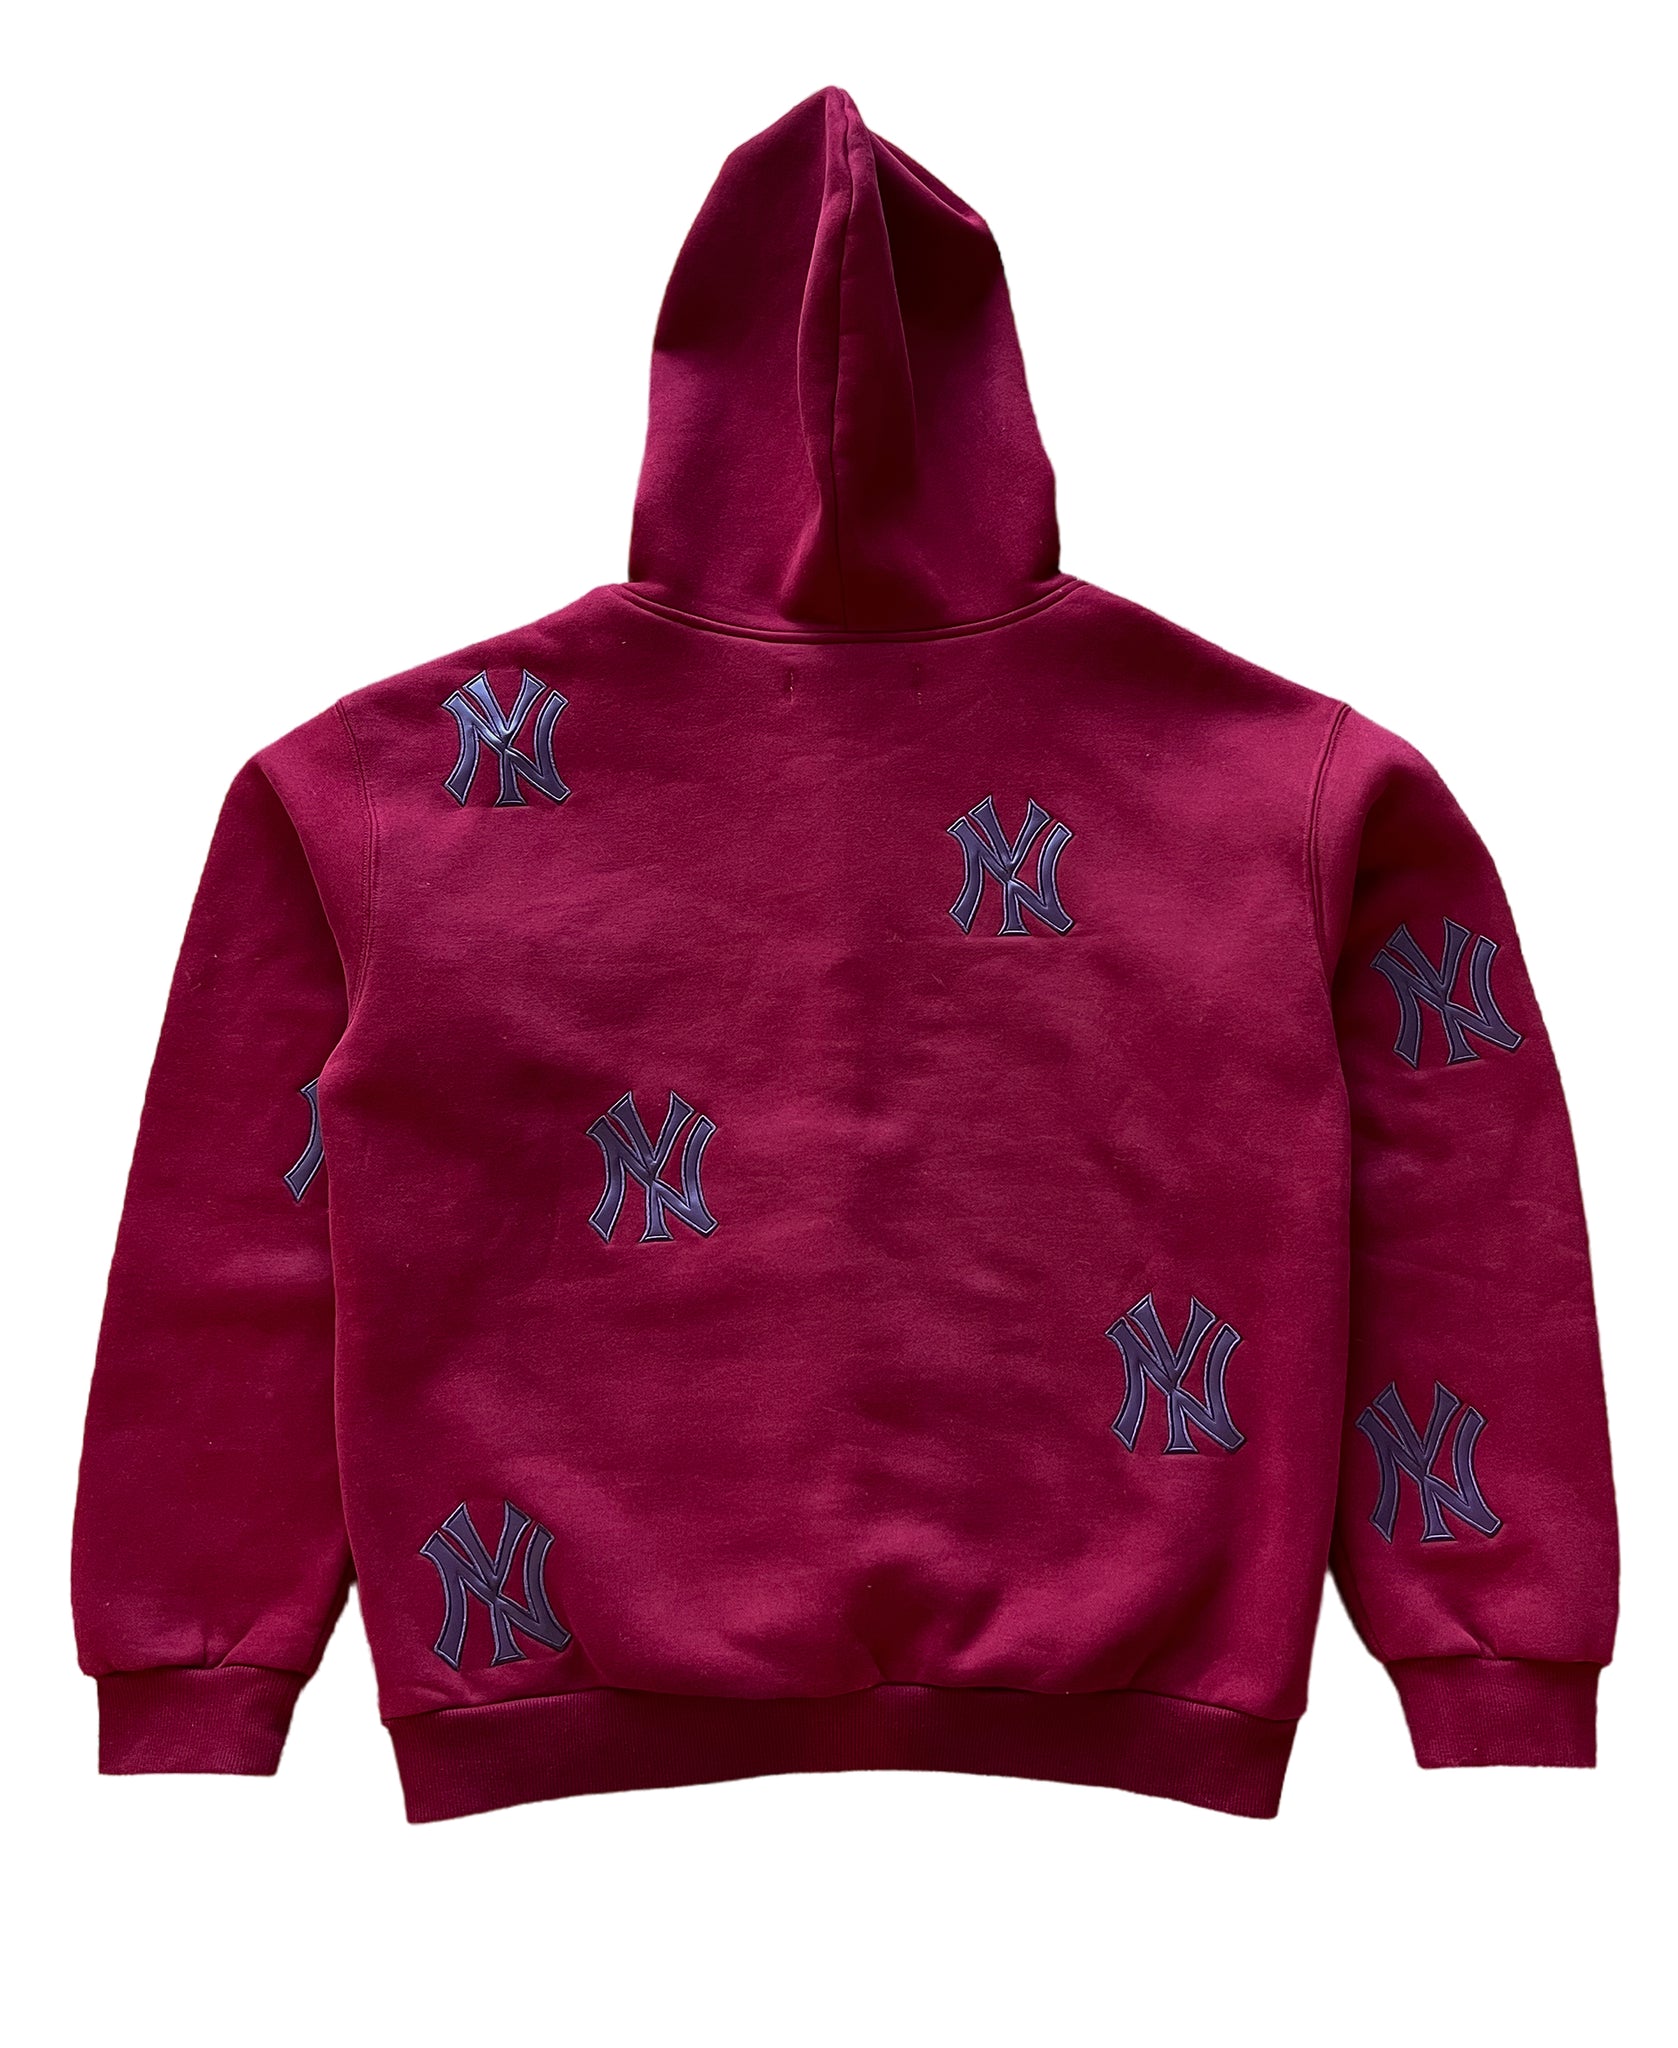 NY Patch Hoodie - Maroon